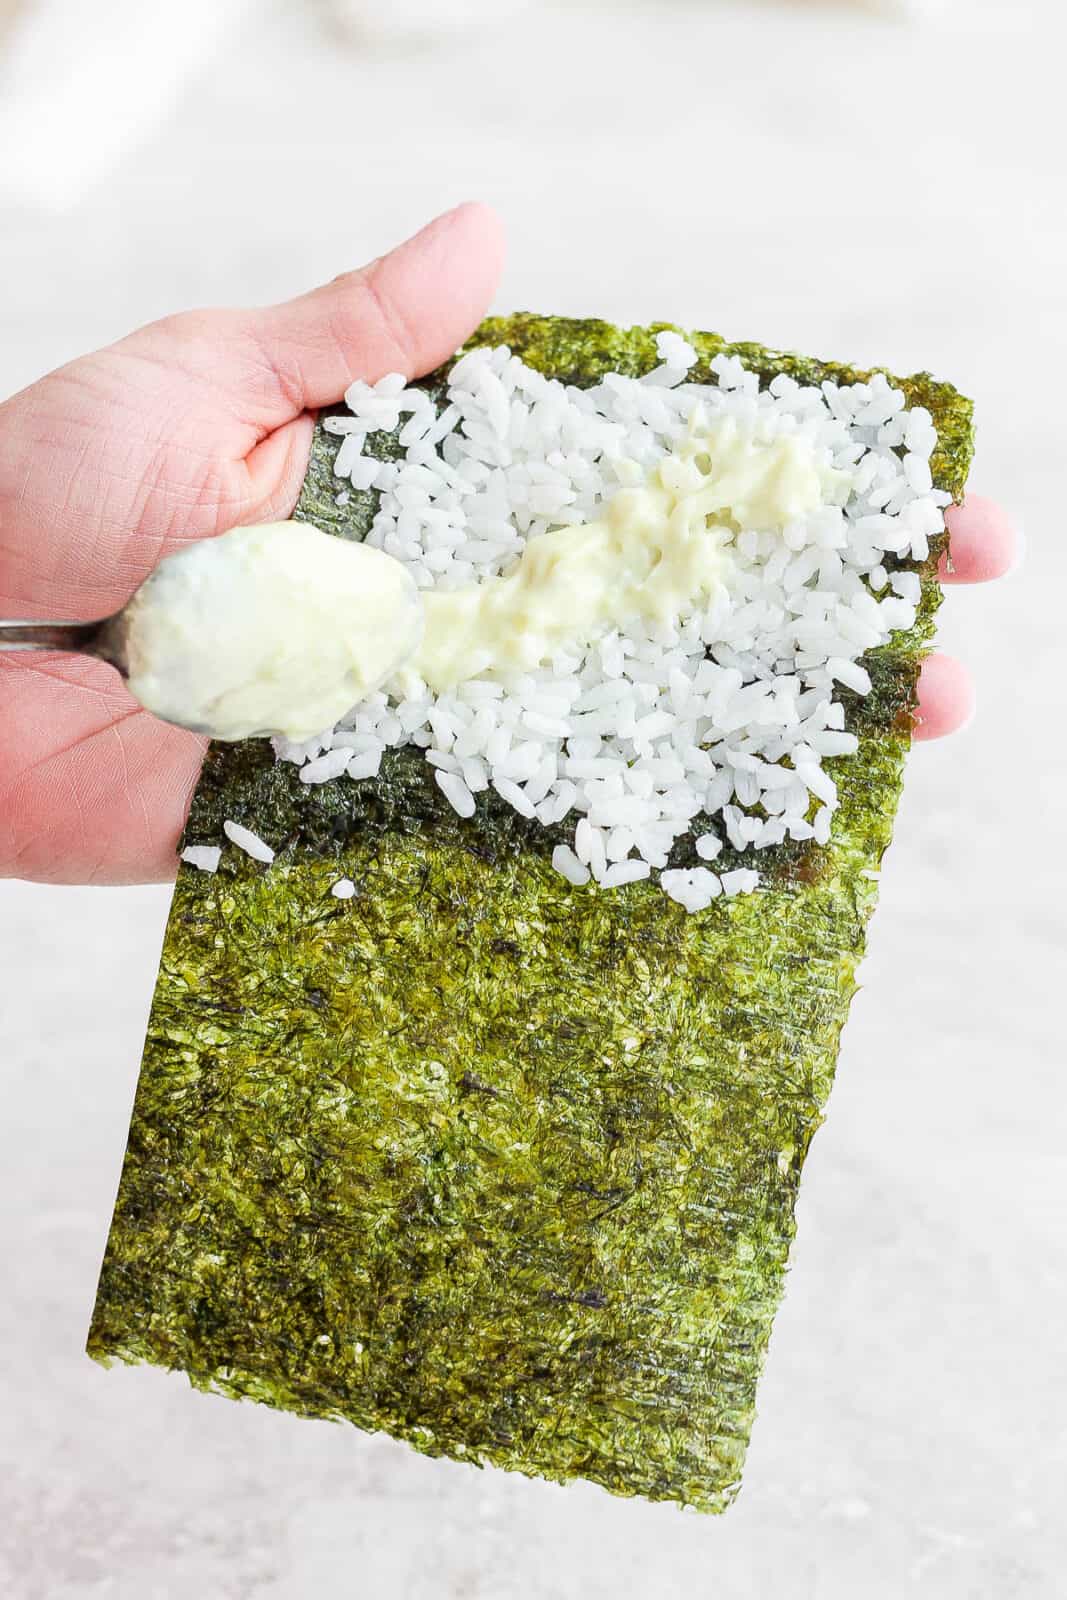 Wasabi mayo being spread on the sushi rice.